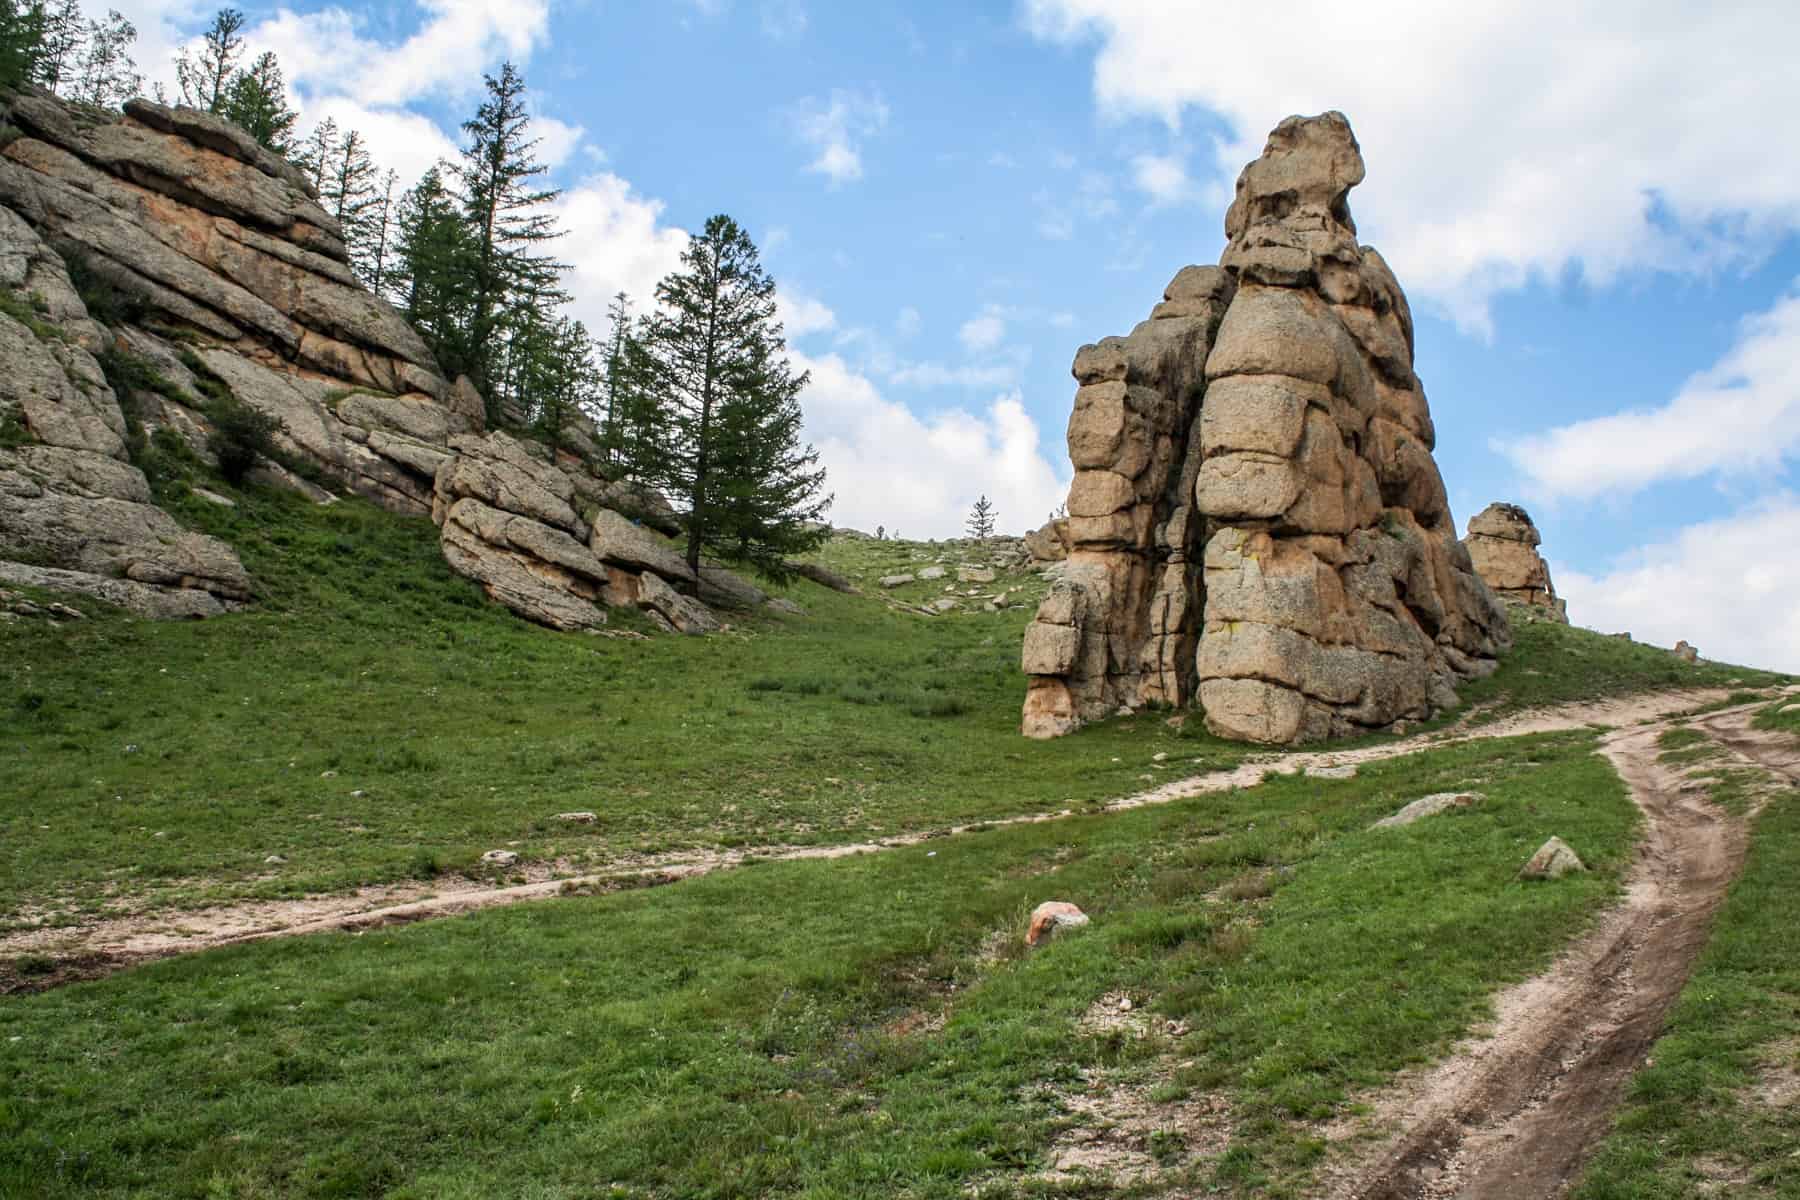 One of the layered rock formations in Terelj National Park Mongolia